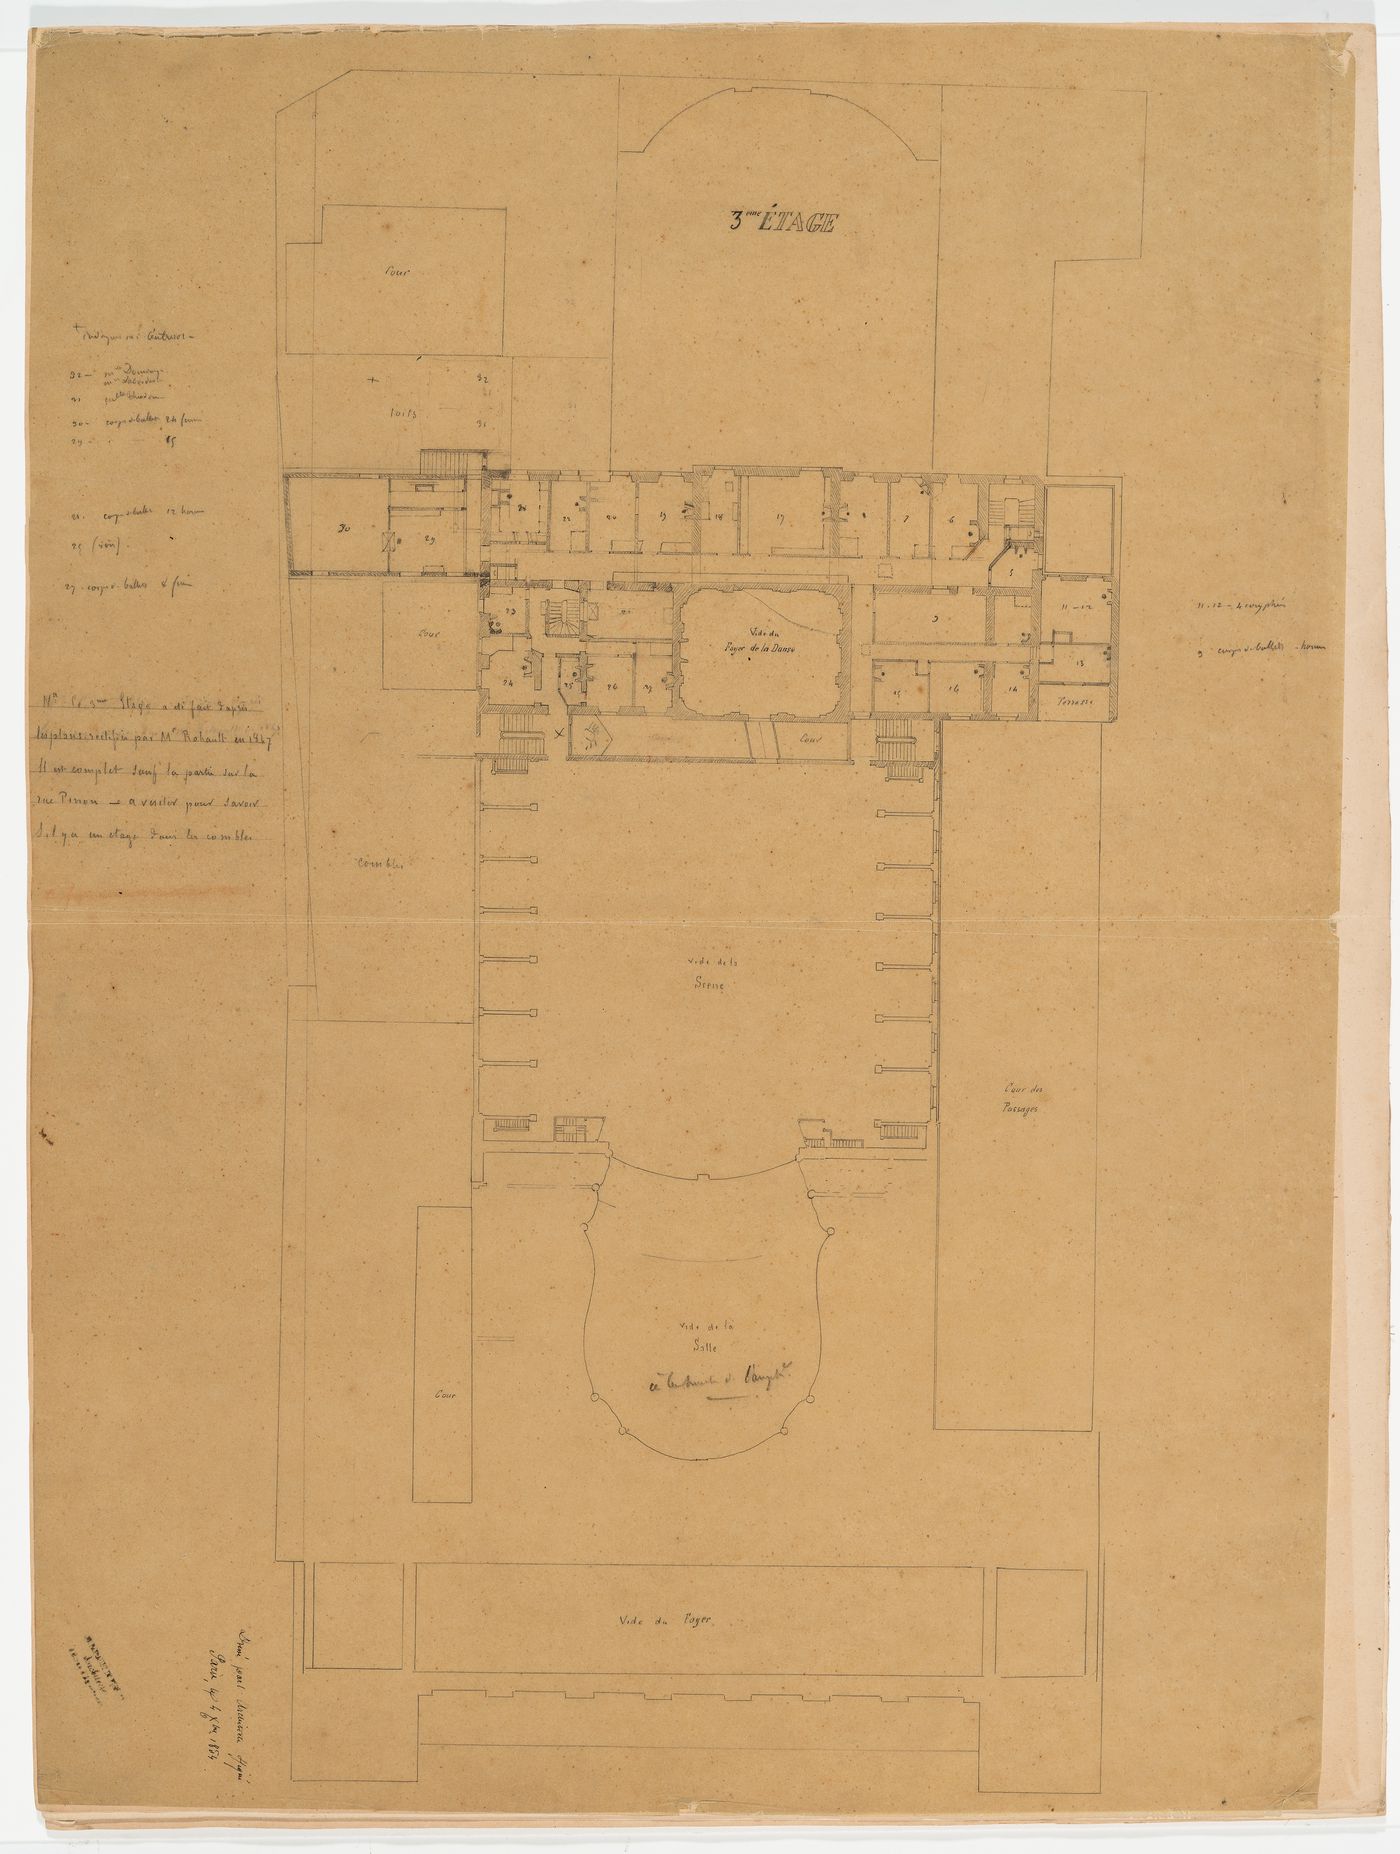 Plan of the "3e étage" with additions for alterations, Salle Le Peletier